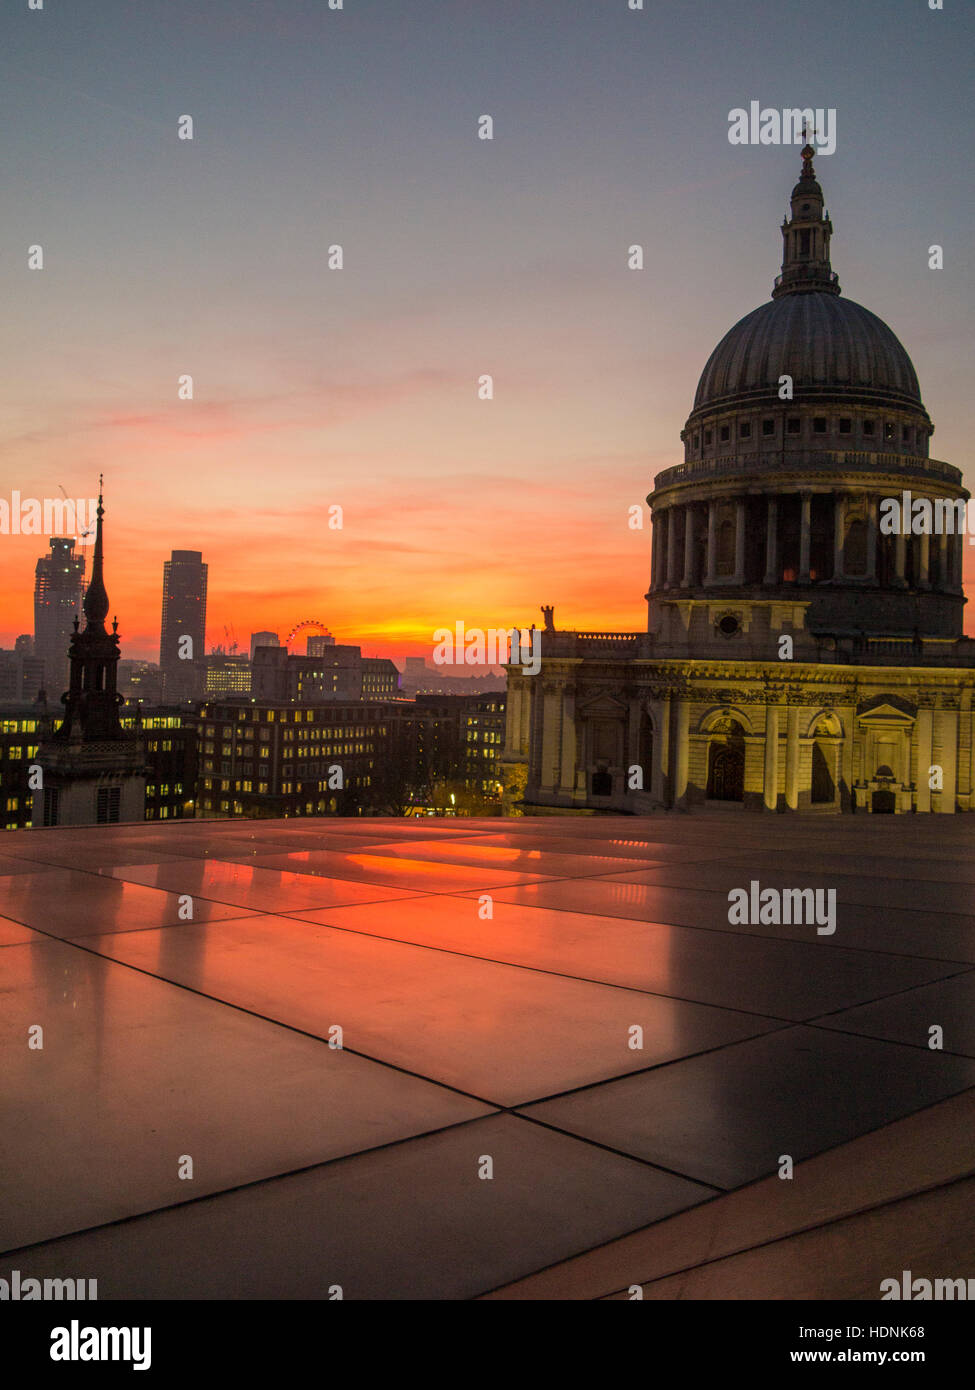 London : St Paul's Cathedral at sunset with a City skyline behind Stock Photo